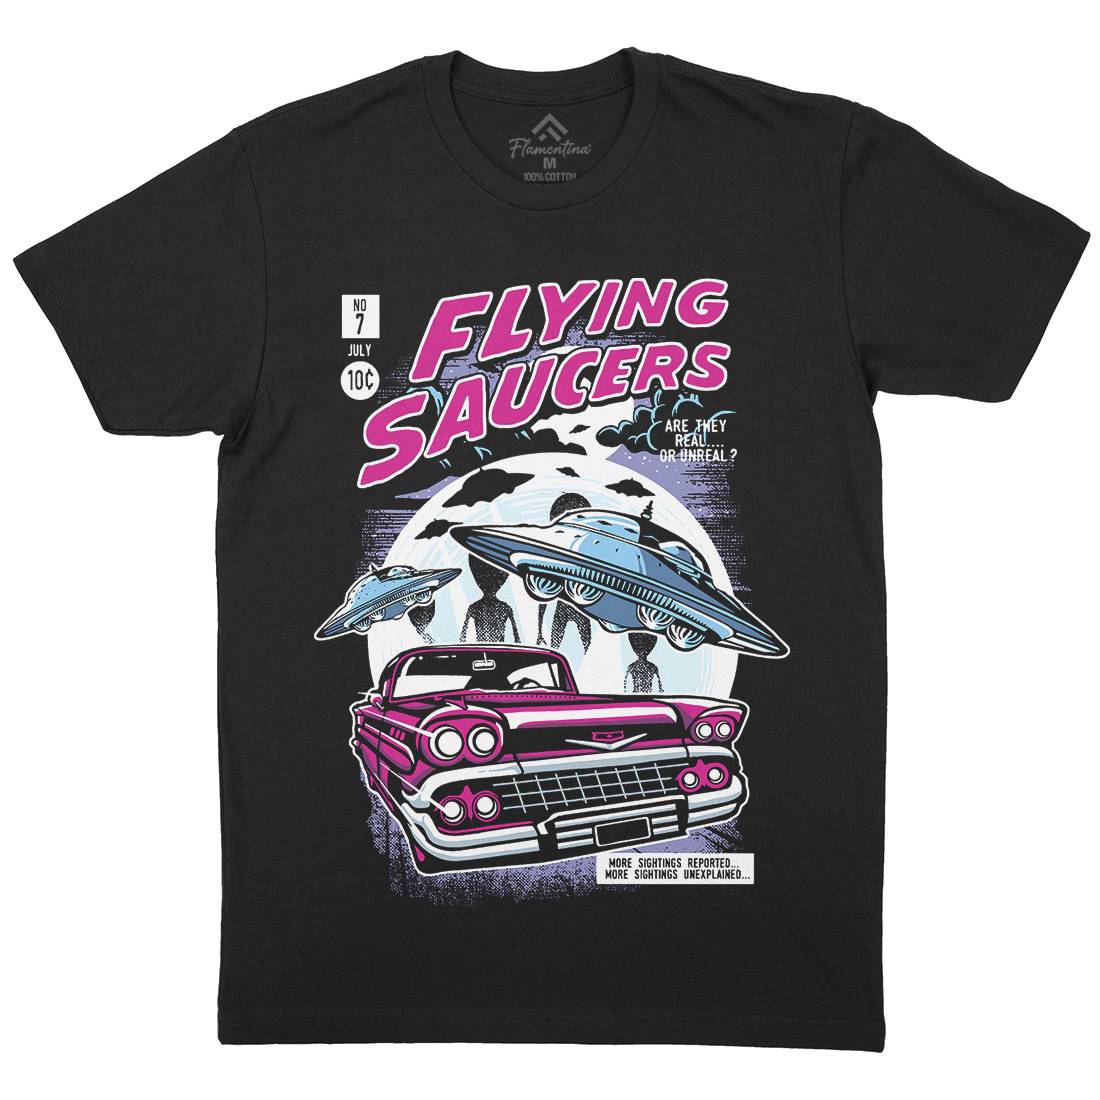 Flying Saucers Mens Crew Neck T-Shirt Space A531